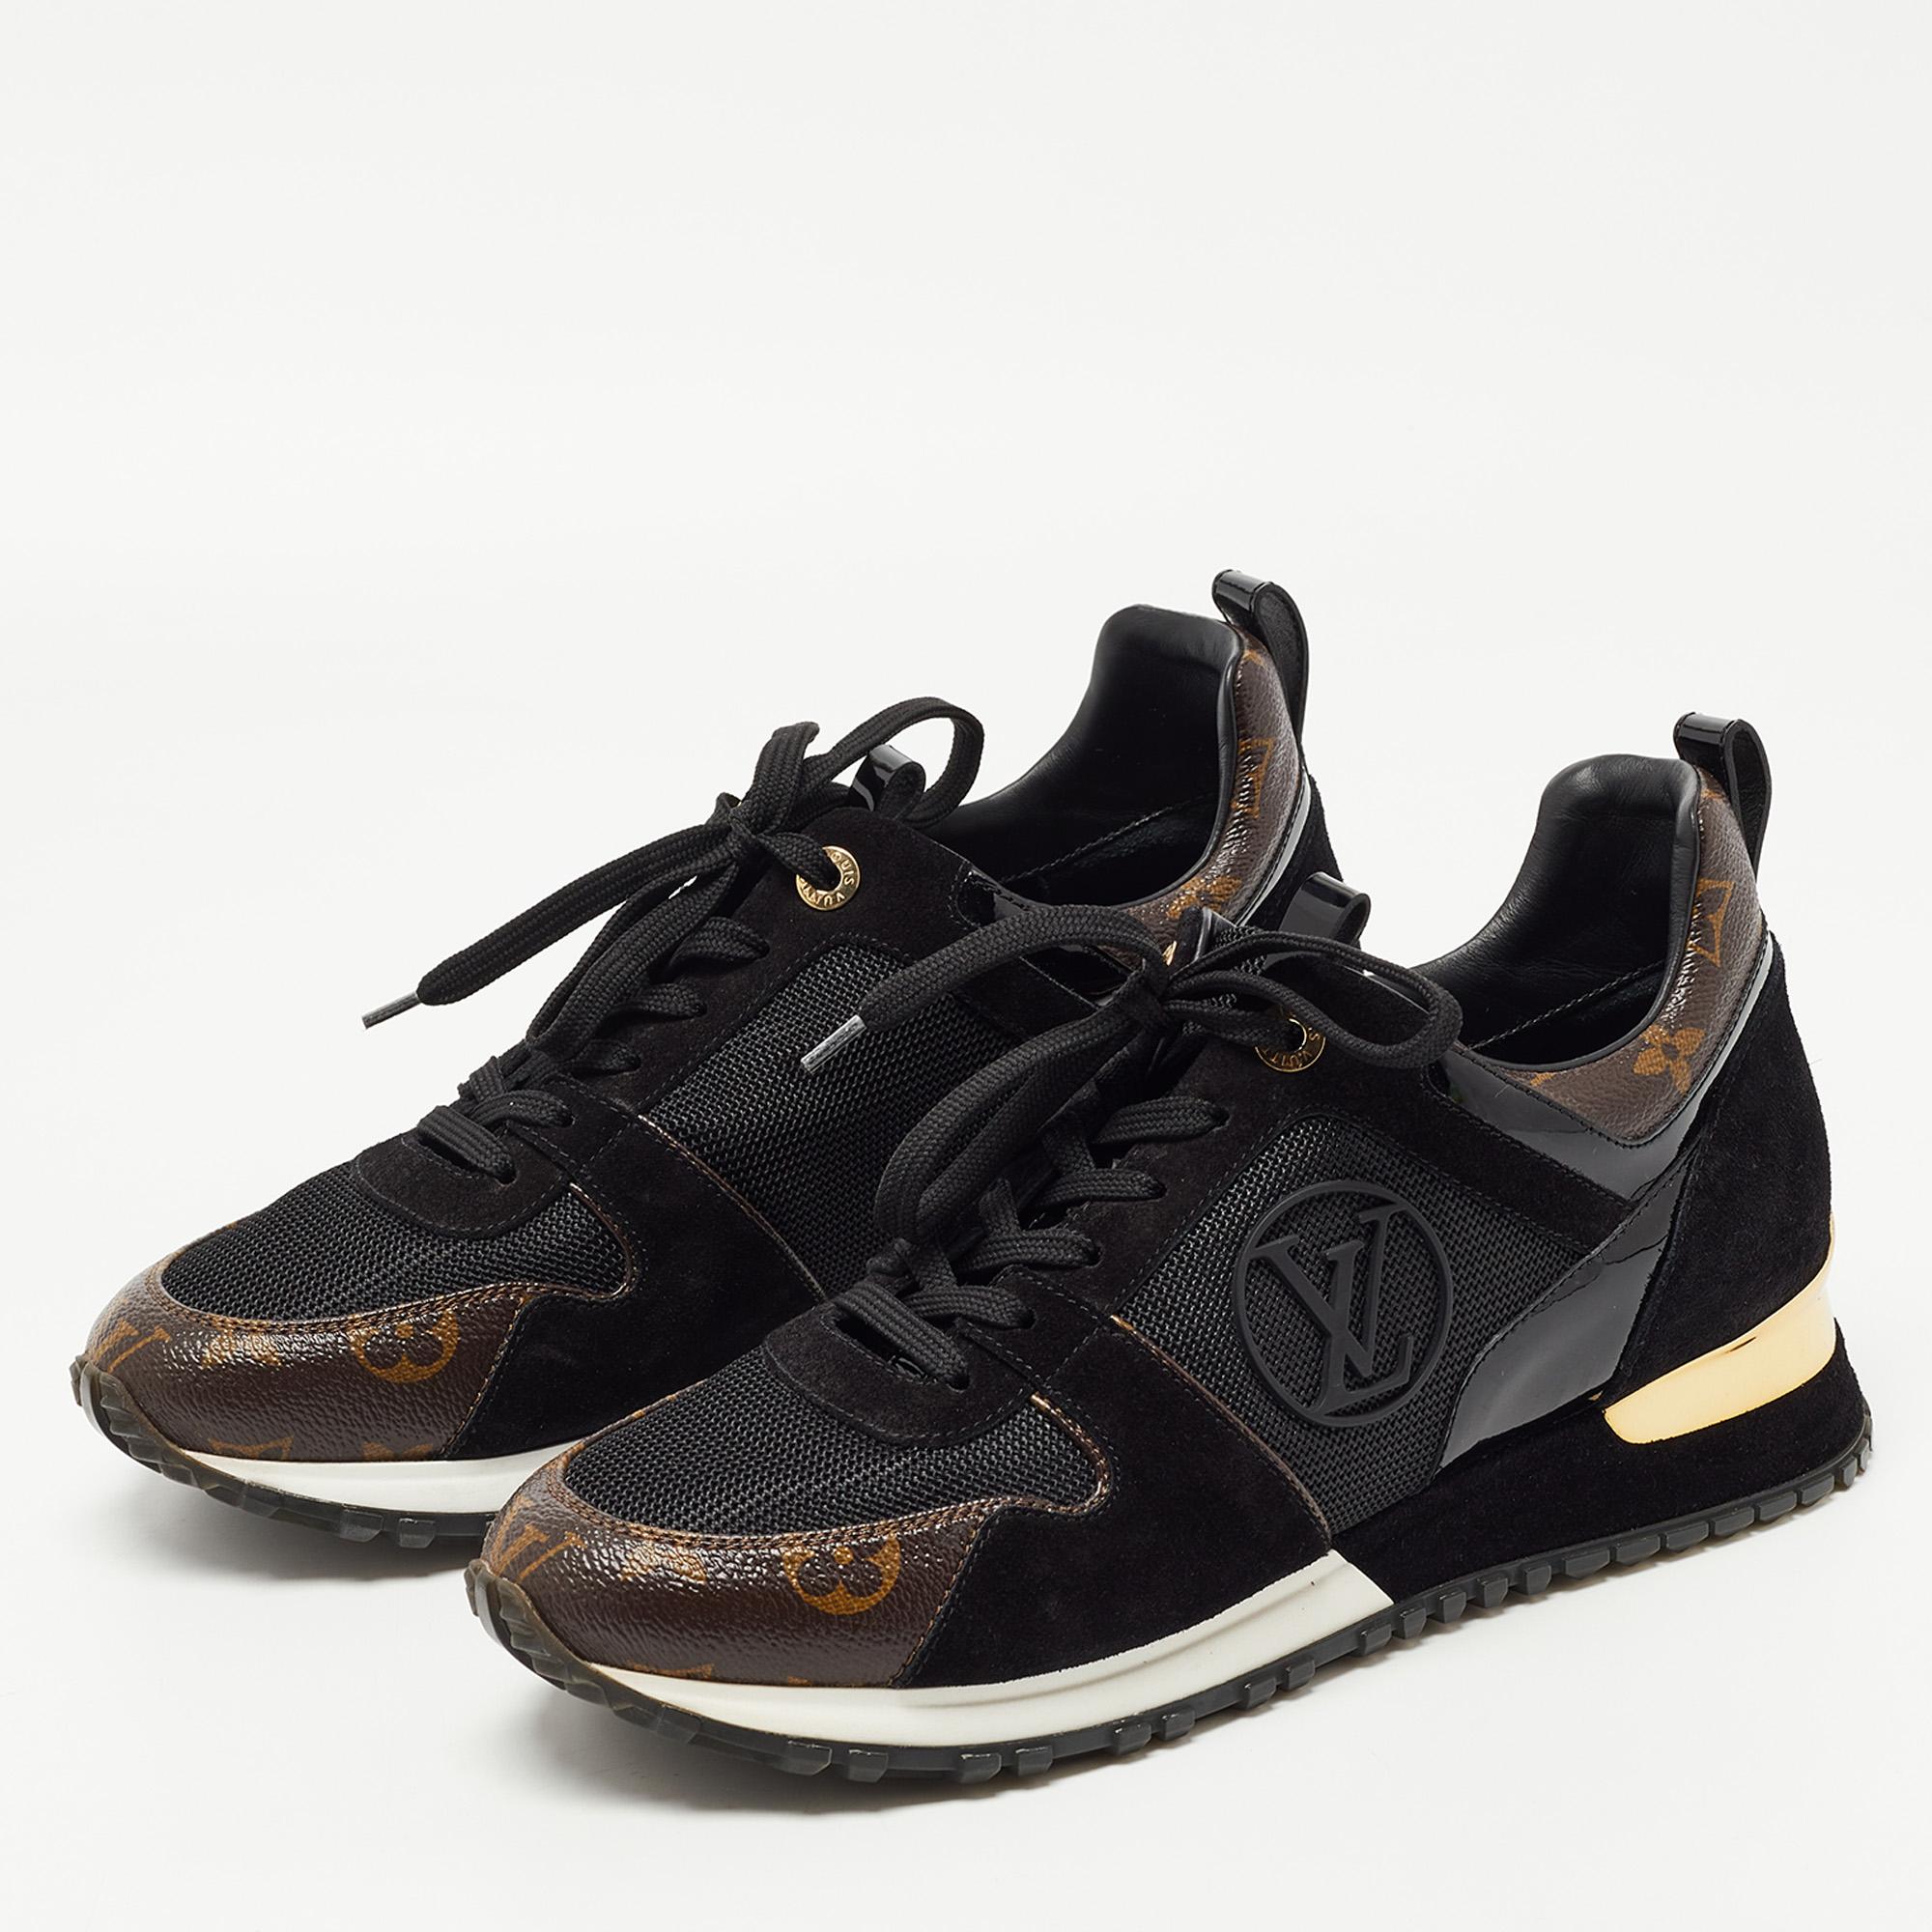 Coming in a classic silhouette, these Louis Vuitton sneakers are a seamless combination of luxury, comfort, and style. These sneakers are designed with signature details and comfortable insoles.

